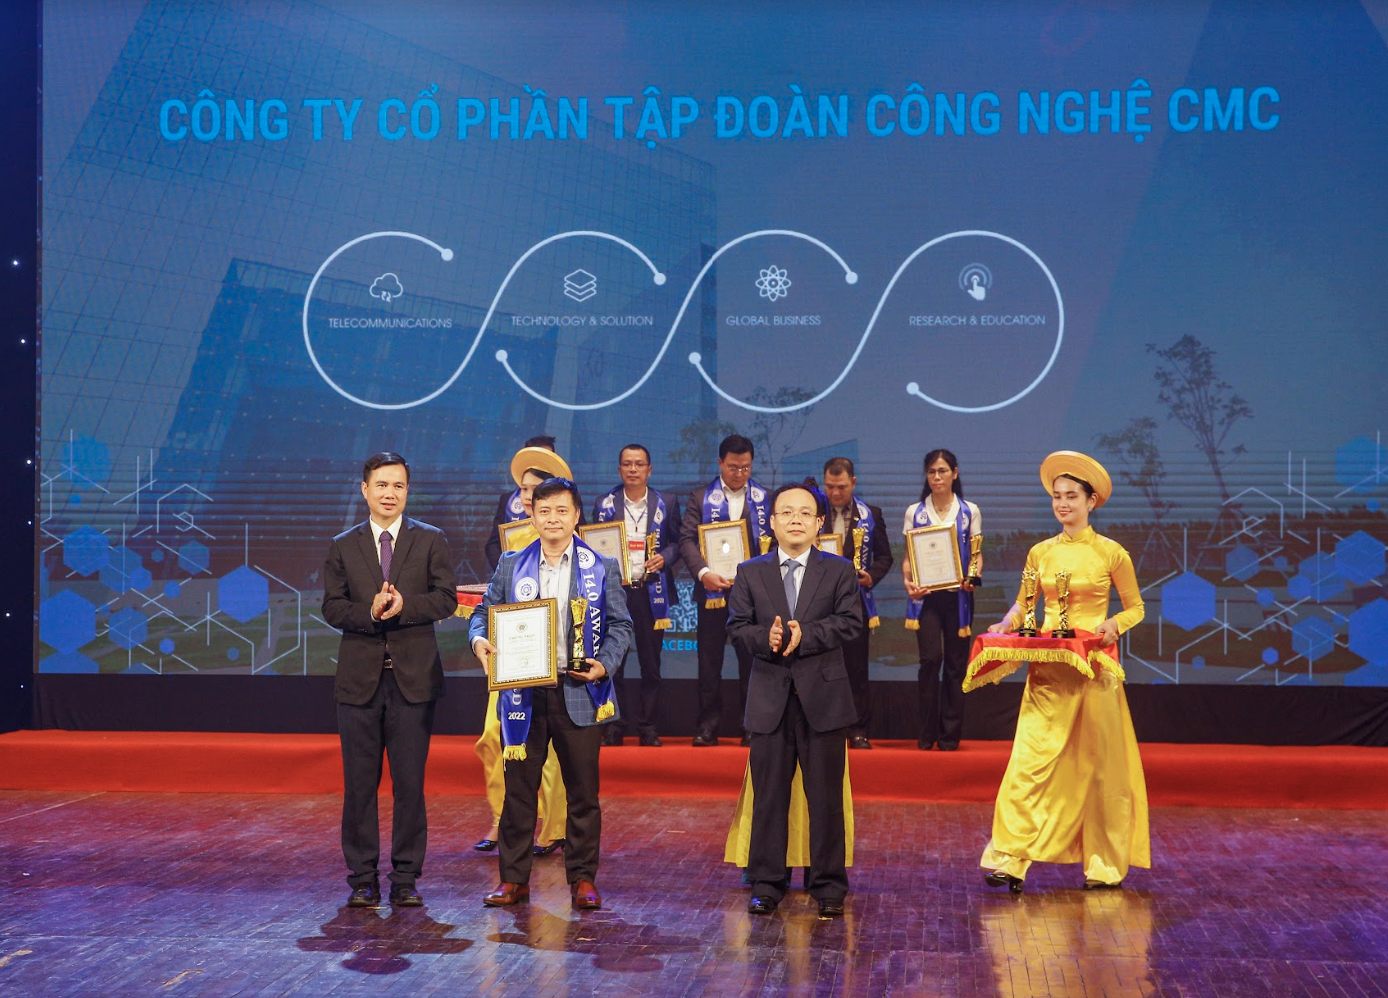 7 CMC products honored with 'Top Industry 4.0 Vietnam'